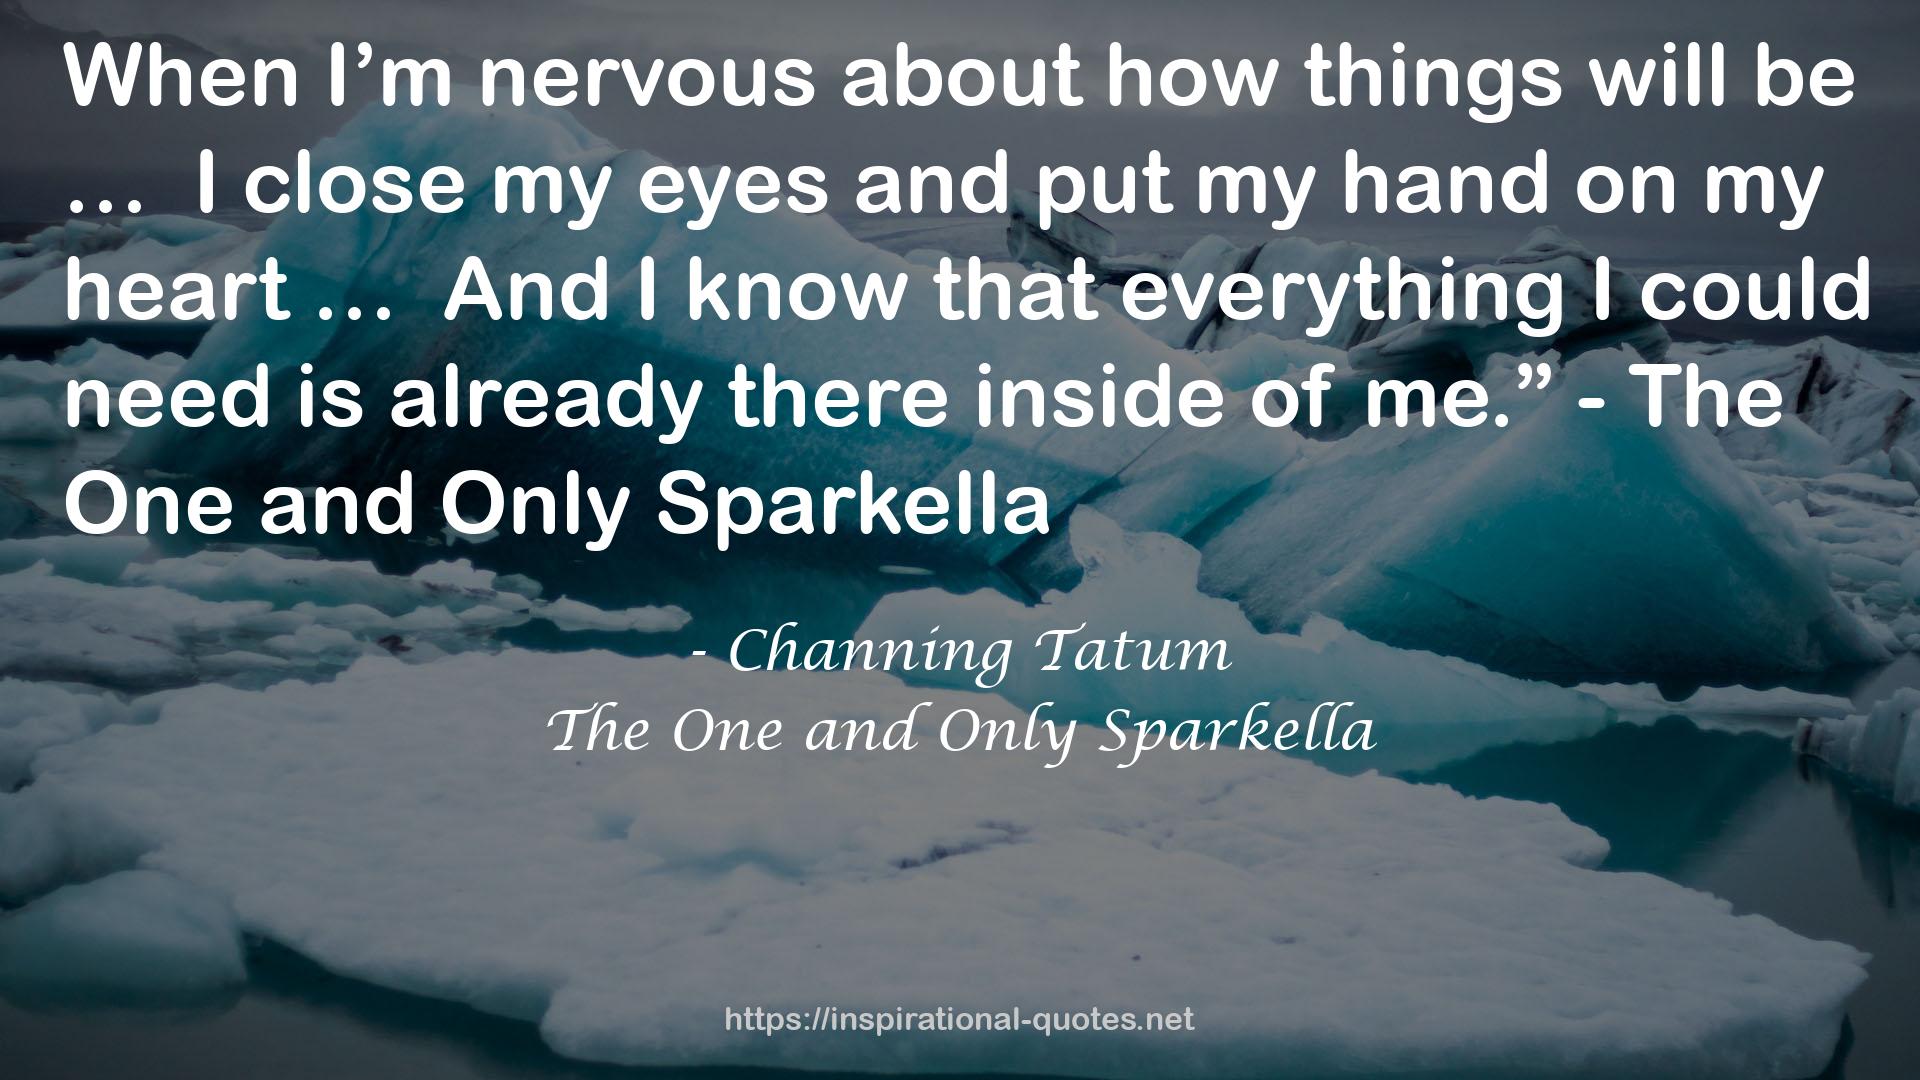 The One and Only Sparkella QUOTES